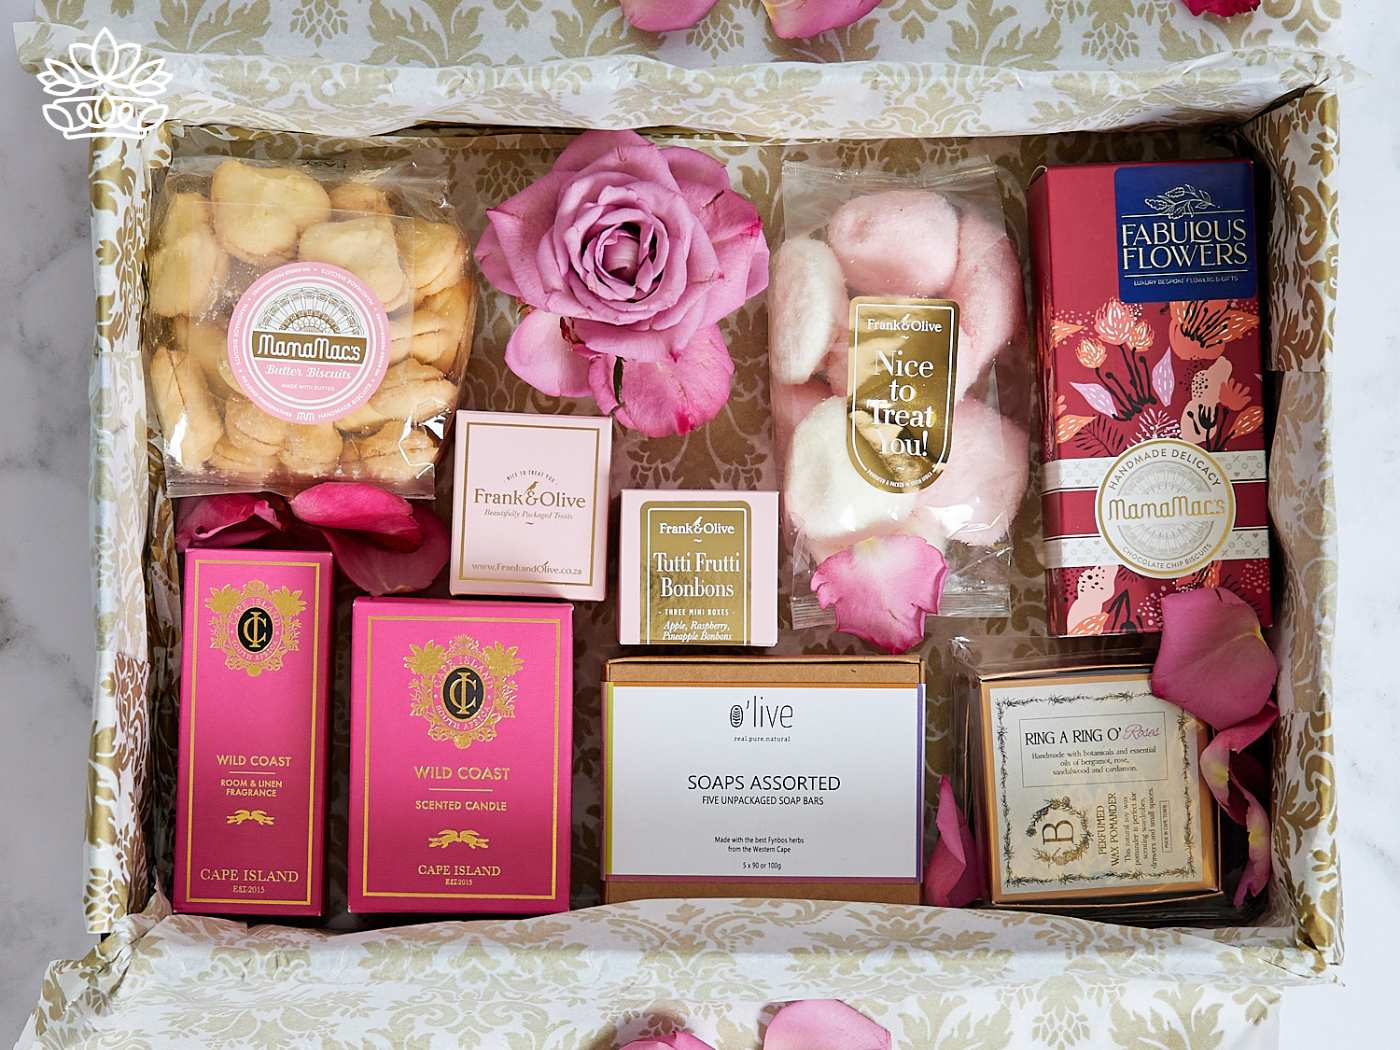 A beautifully curated gift box open to display an array of luxurious items including assorted soaps, scented candles, butter biscuits, and a variety of treats, all nestled among elegant pink rose petals. Each product is thoughtfully selected to delight, making this the perfect offering from Fabulous Flowers and Gifts. Gift Boxes for wife. Delivered with Heart.